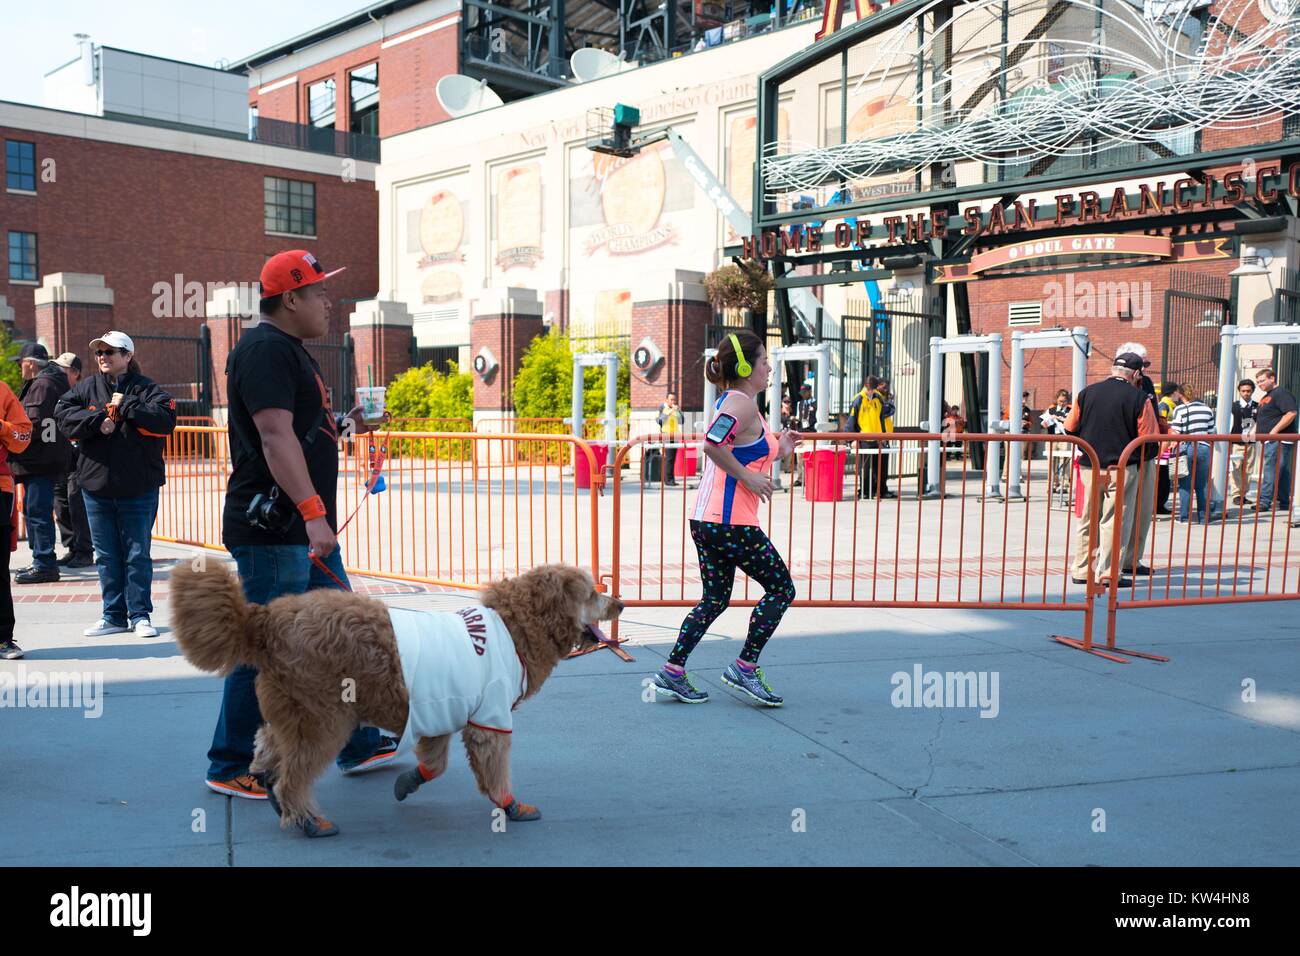 A man walks his dog, which wears a jersey for baseball player Madison Bumgarner, towards O'Doul Gate before the Dog Days of Summer promotional baseball game, a yearly event in which the San Francisco Giants baseball team allows fans to bring their dogs to a regular season game, outside ATT Park in the China Basin neighborhood of San Francisco, California, August 21, 2016. Stock Photo